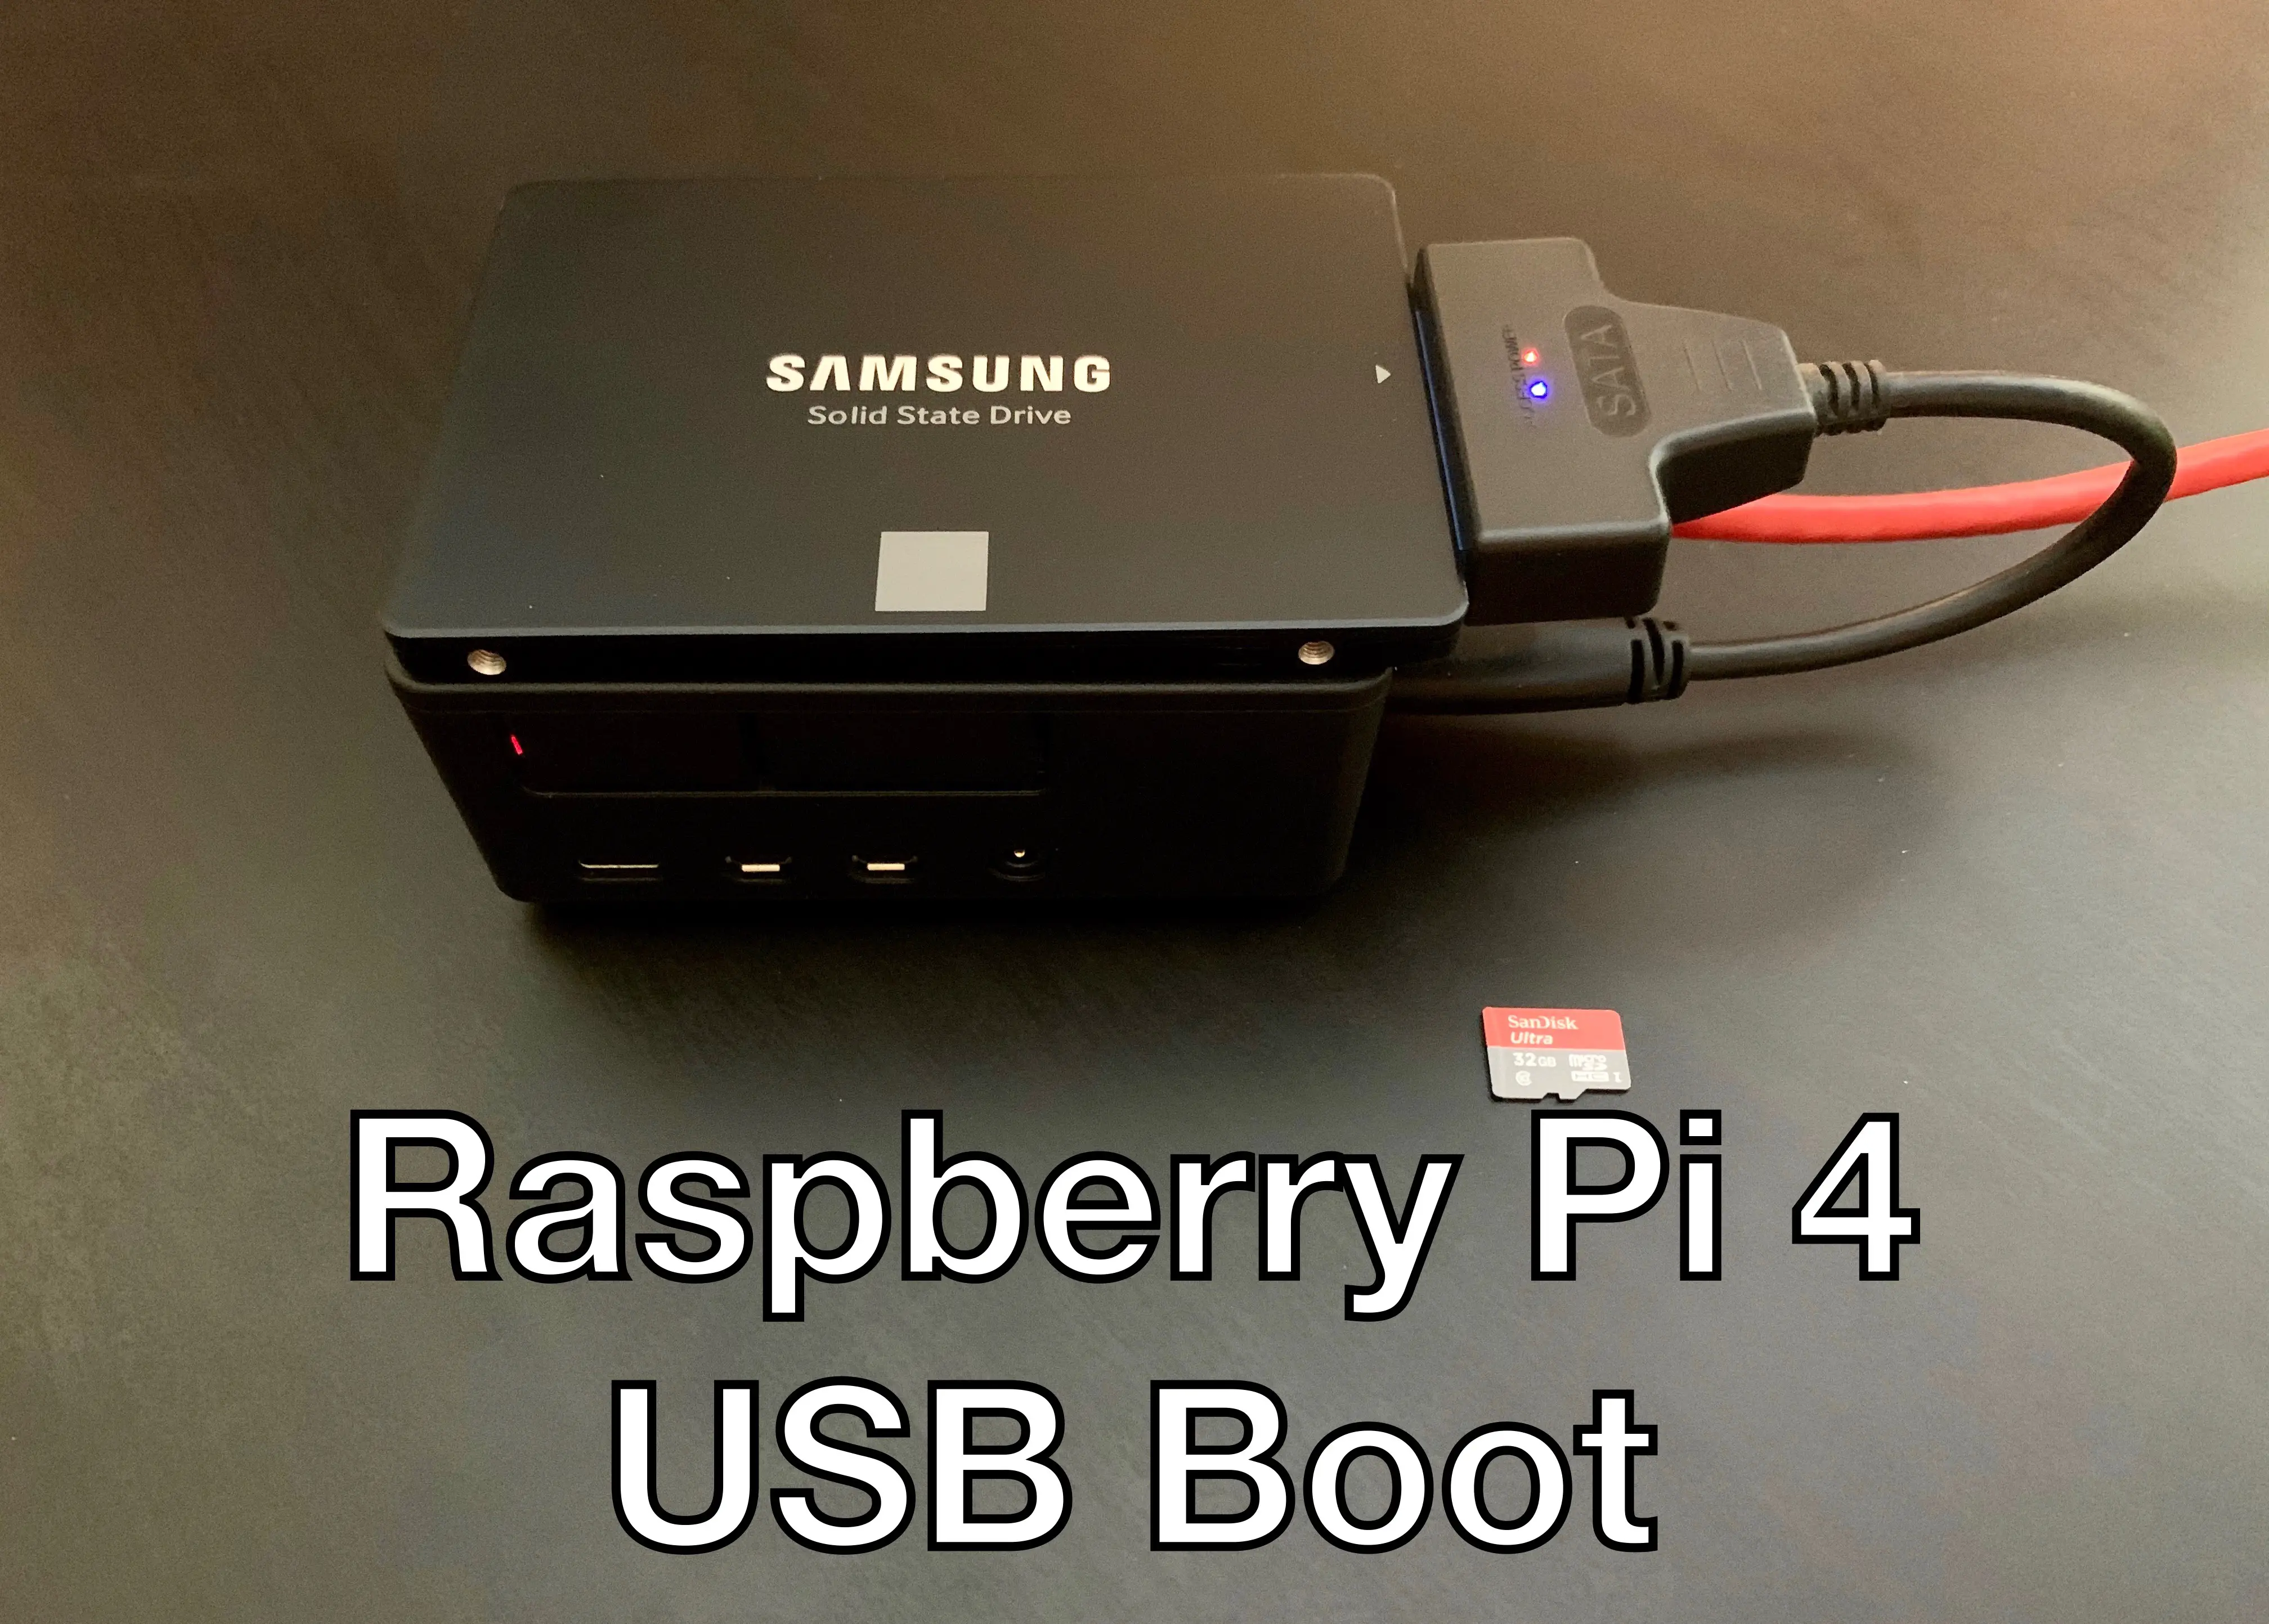 Raspberry Pi 4 Boot From USB